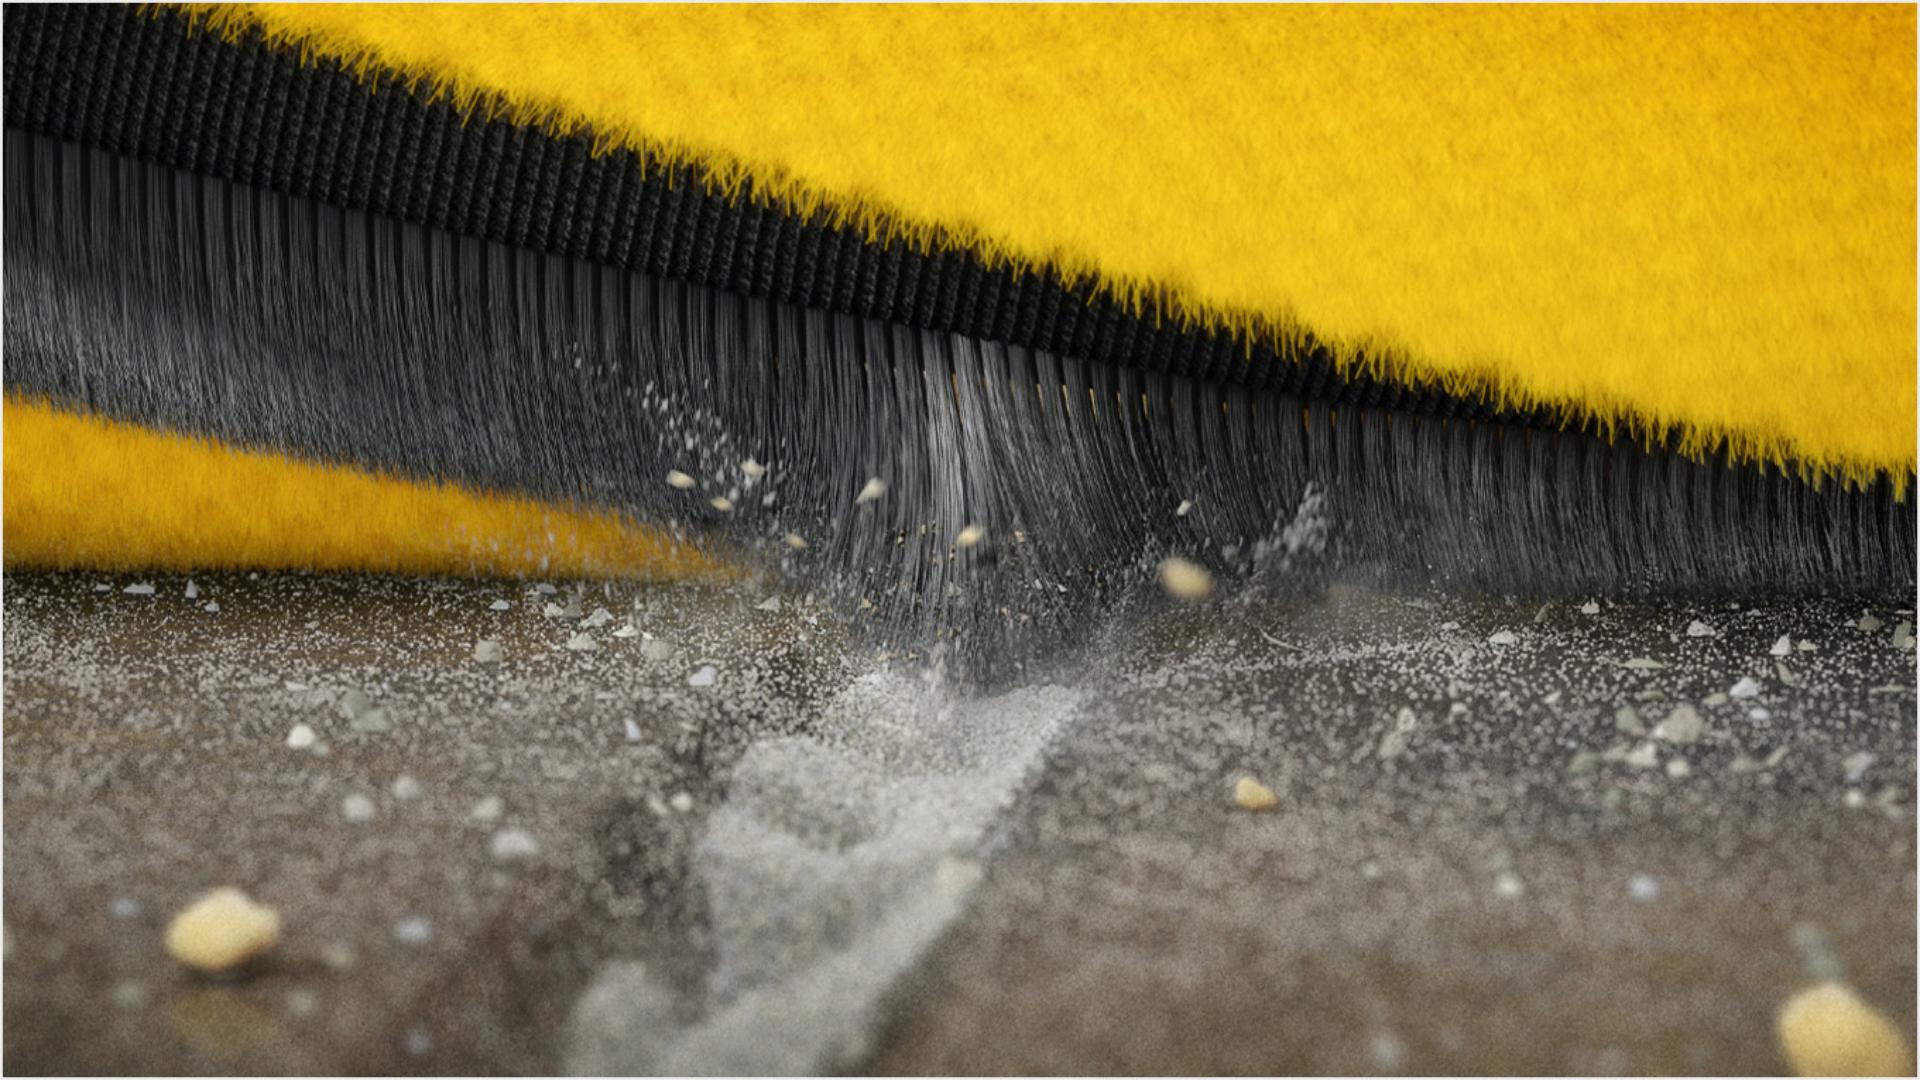 Carbon fibre filaments extracting particles from a floor crevice.